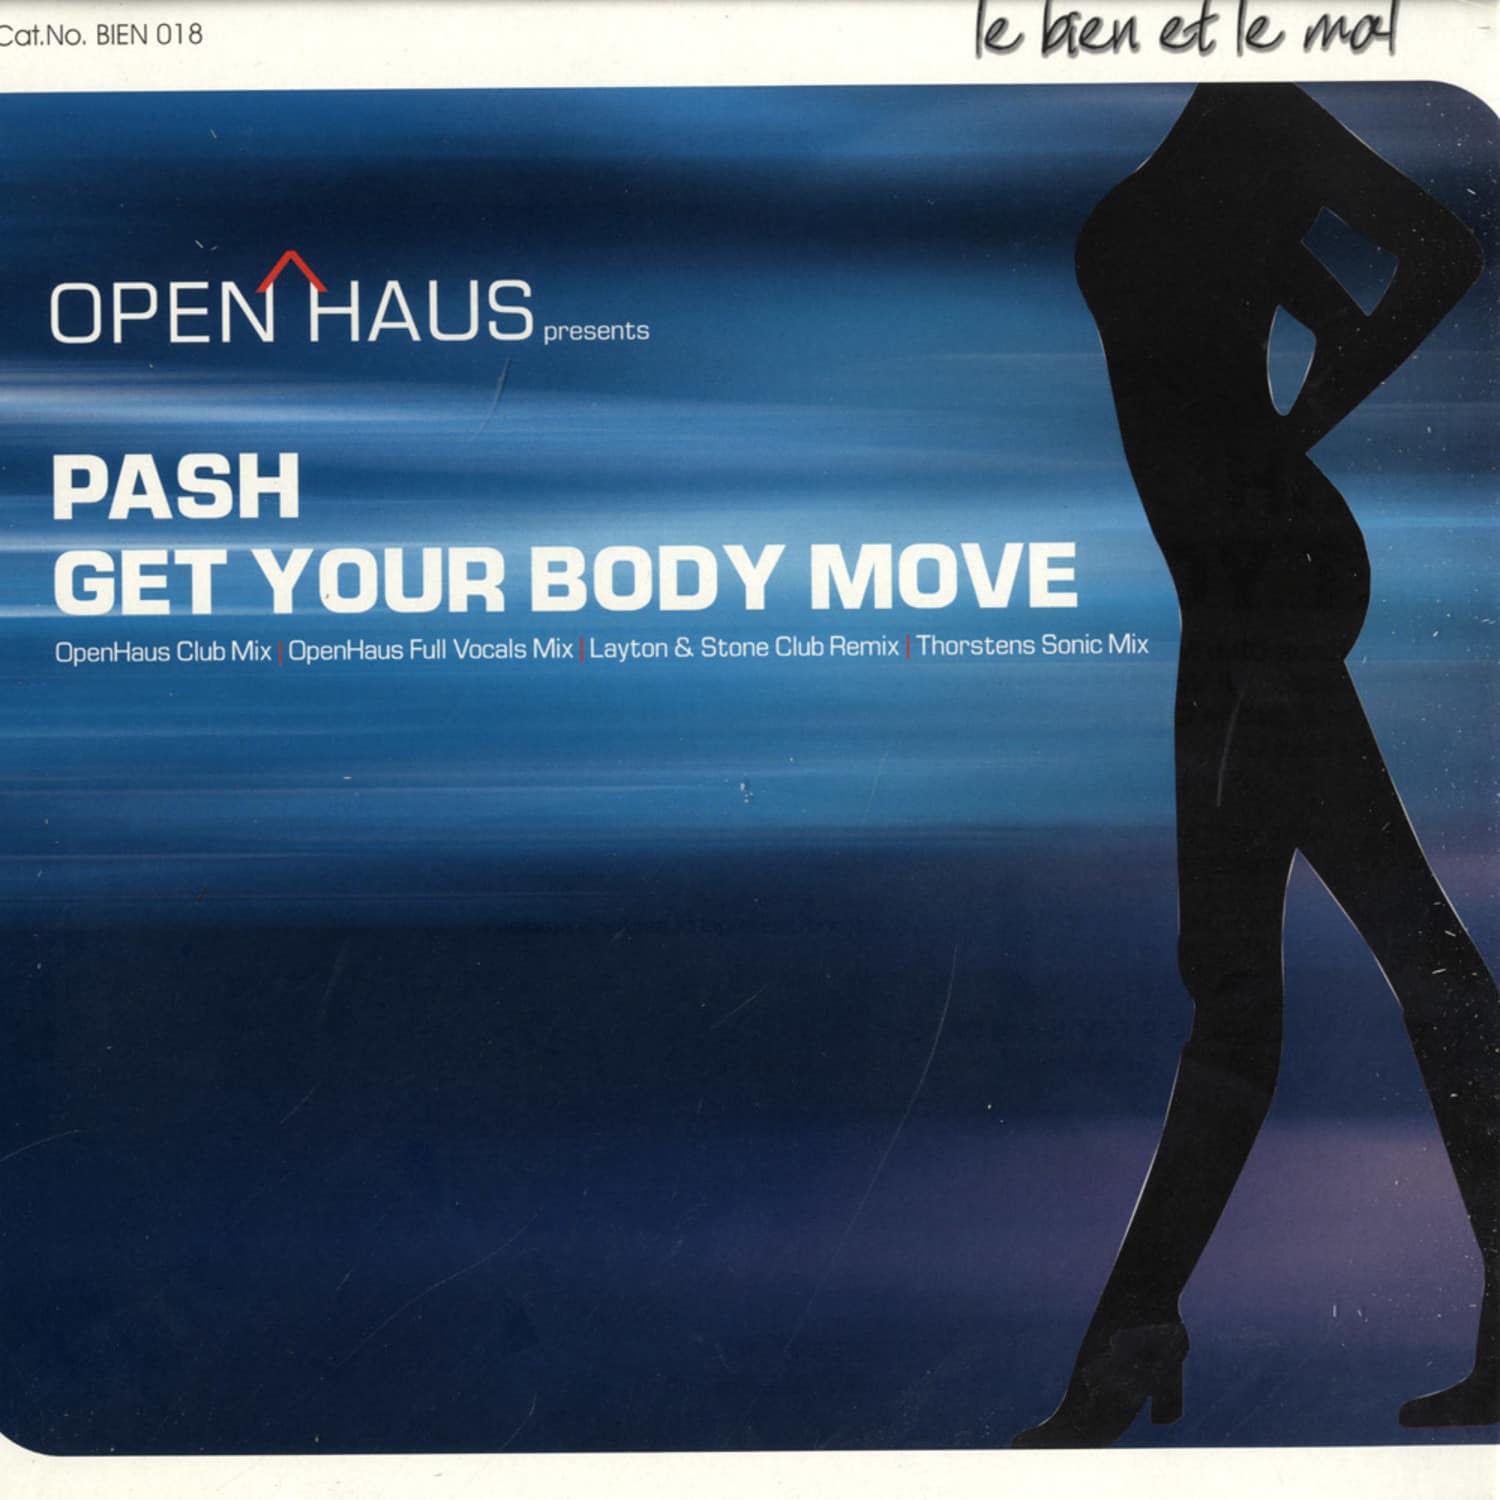 Openhaus presents PASH - GET YOUR BODY MOVE